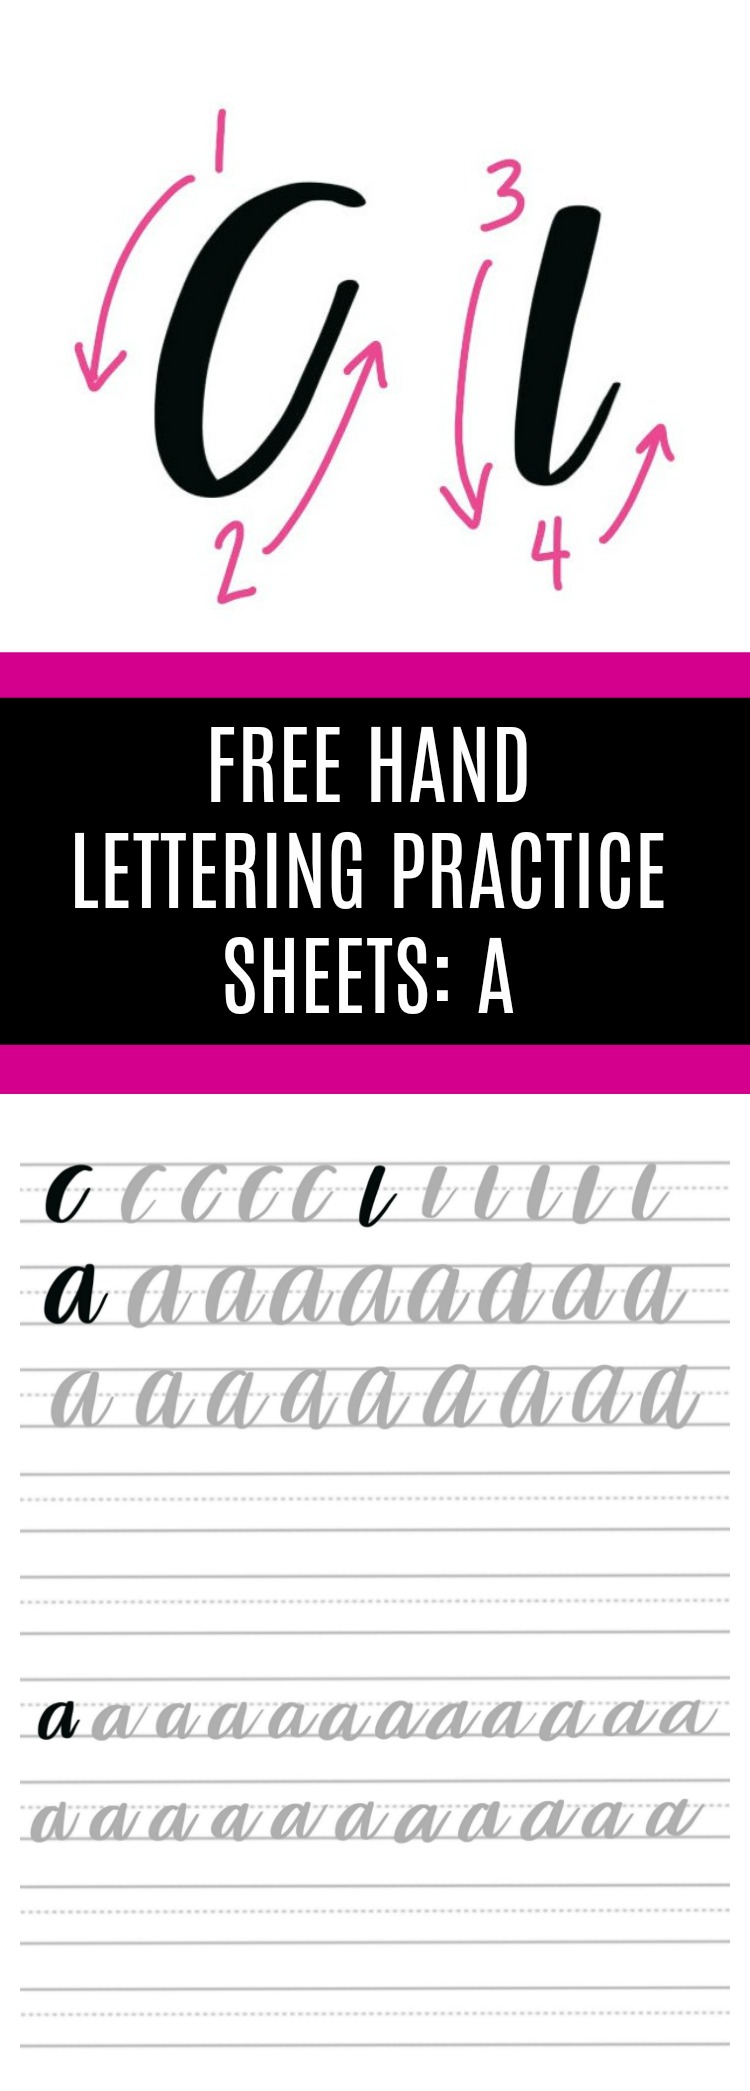 Free Hand Lettering Practice Sheet: A